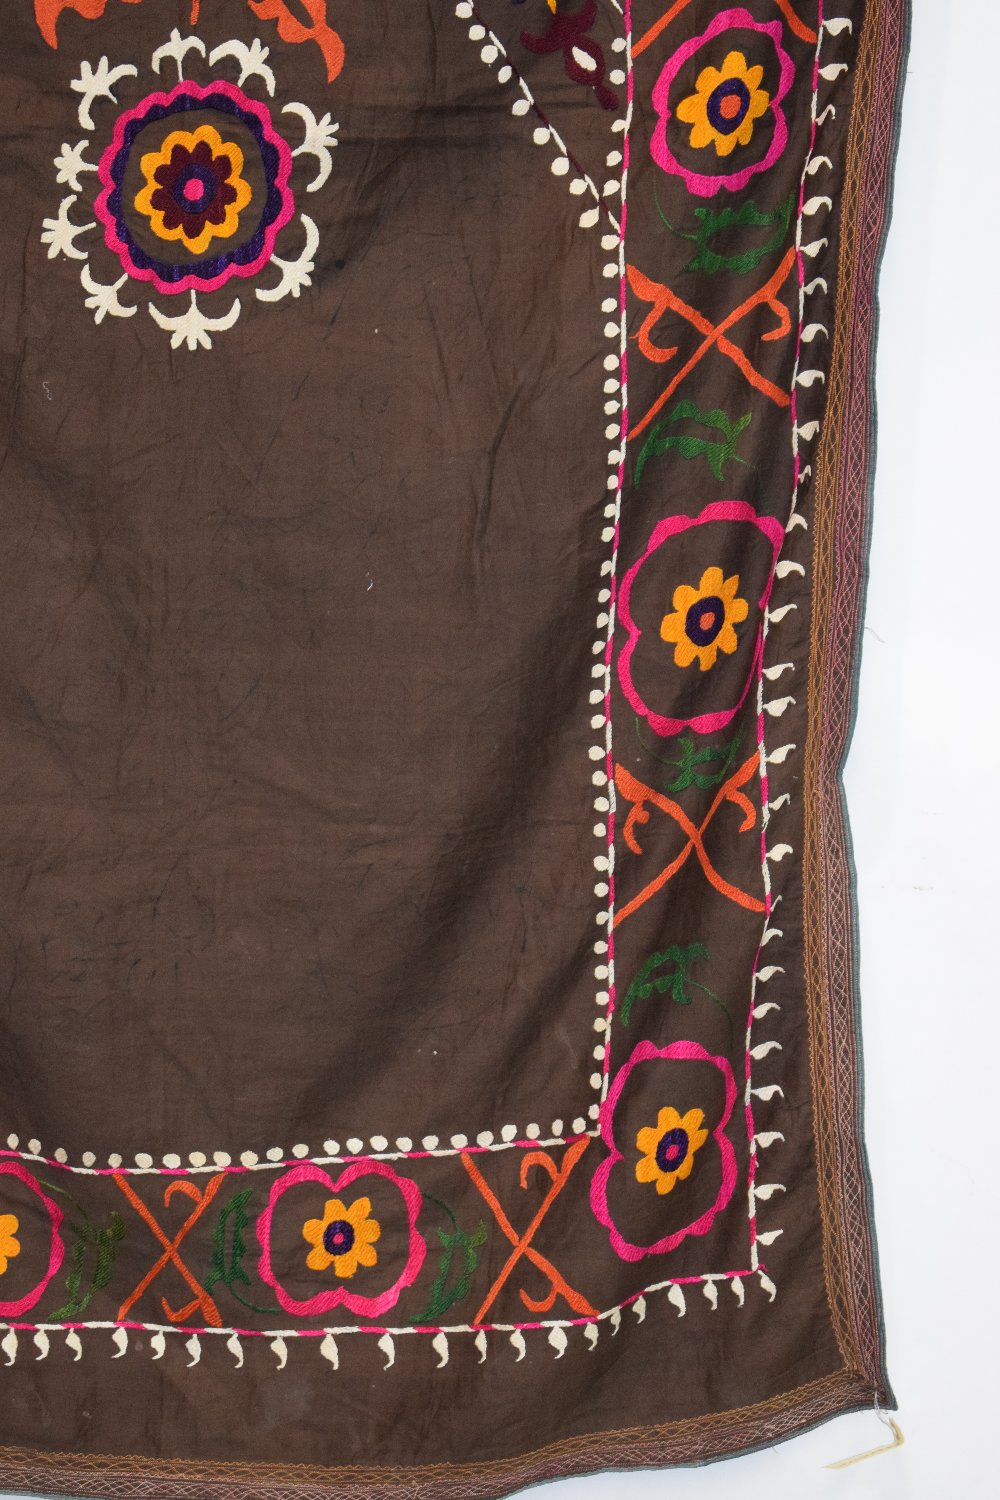 Uzbek suzani joinamoz (prayer cloth), Afghanistan, circa 1960s, 6ft. 3in. X 3ft. 5in. 1.91m. x 1. - Image 2 of 12